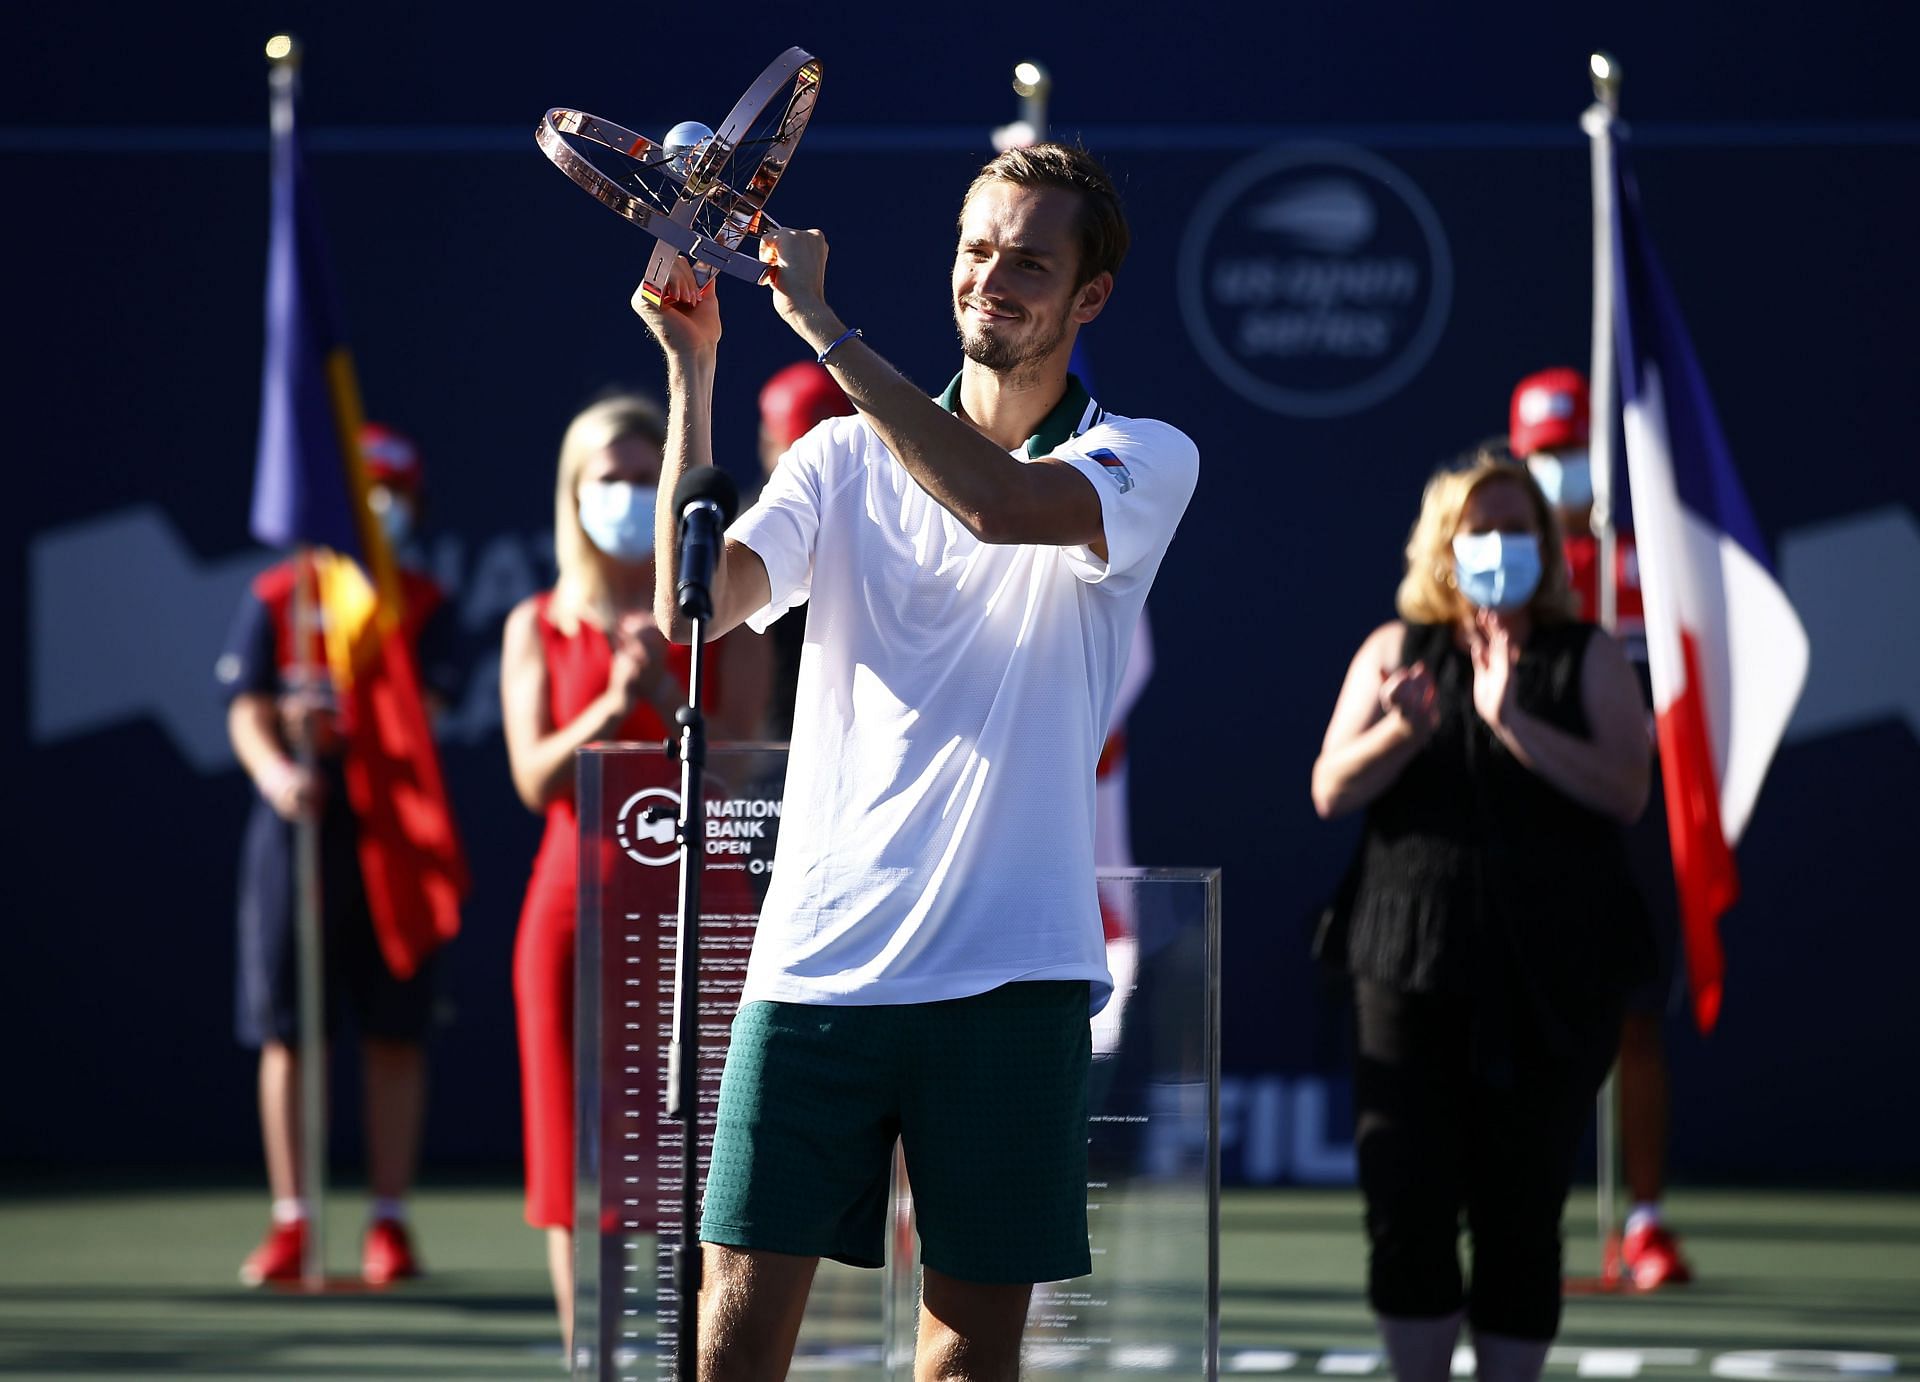 Daniil Medvedev with the National Bank Open 2021 title